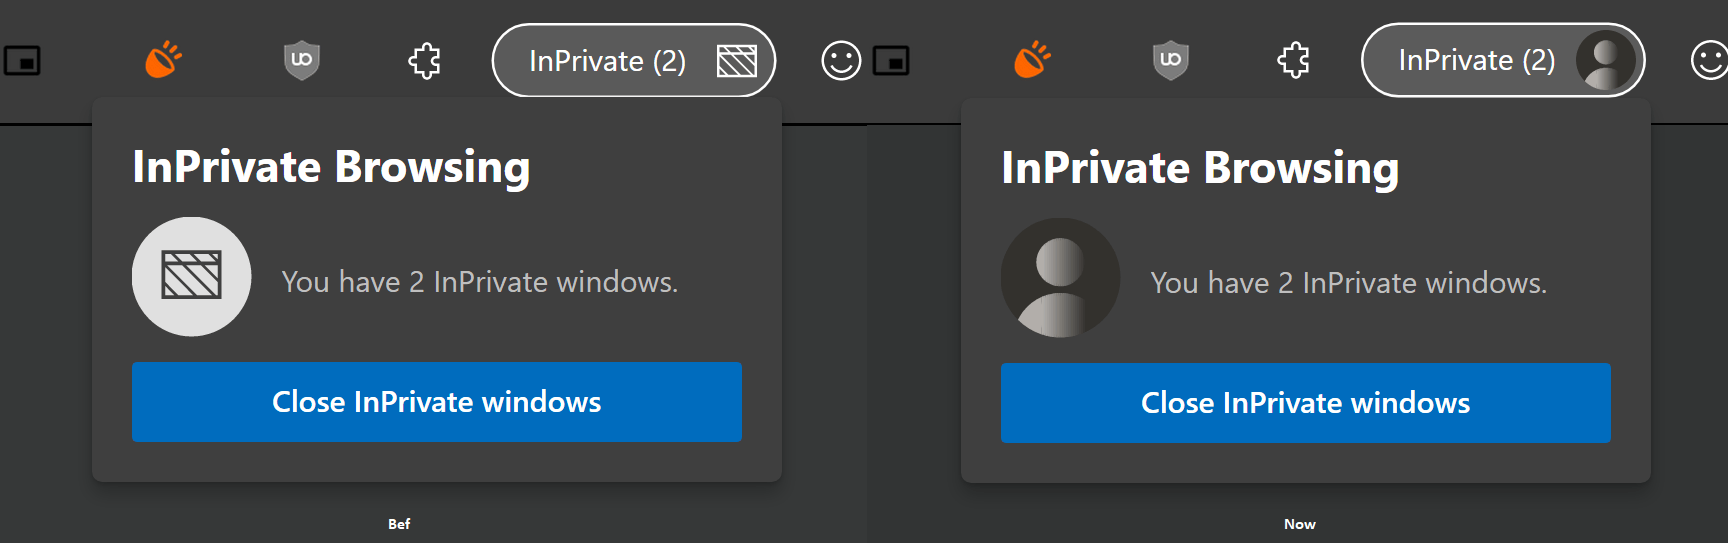 Edge New InPrivate Badge